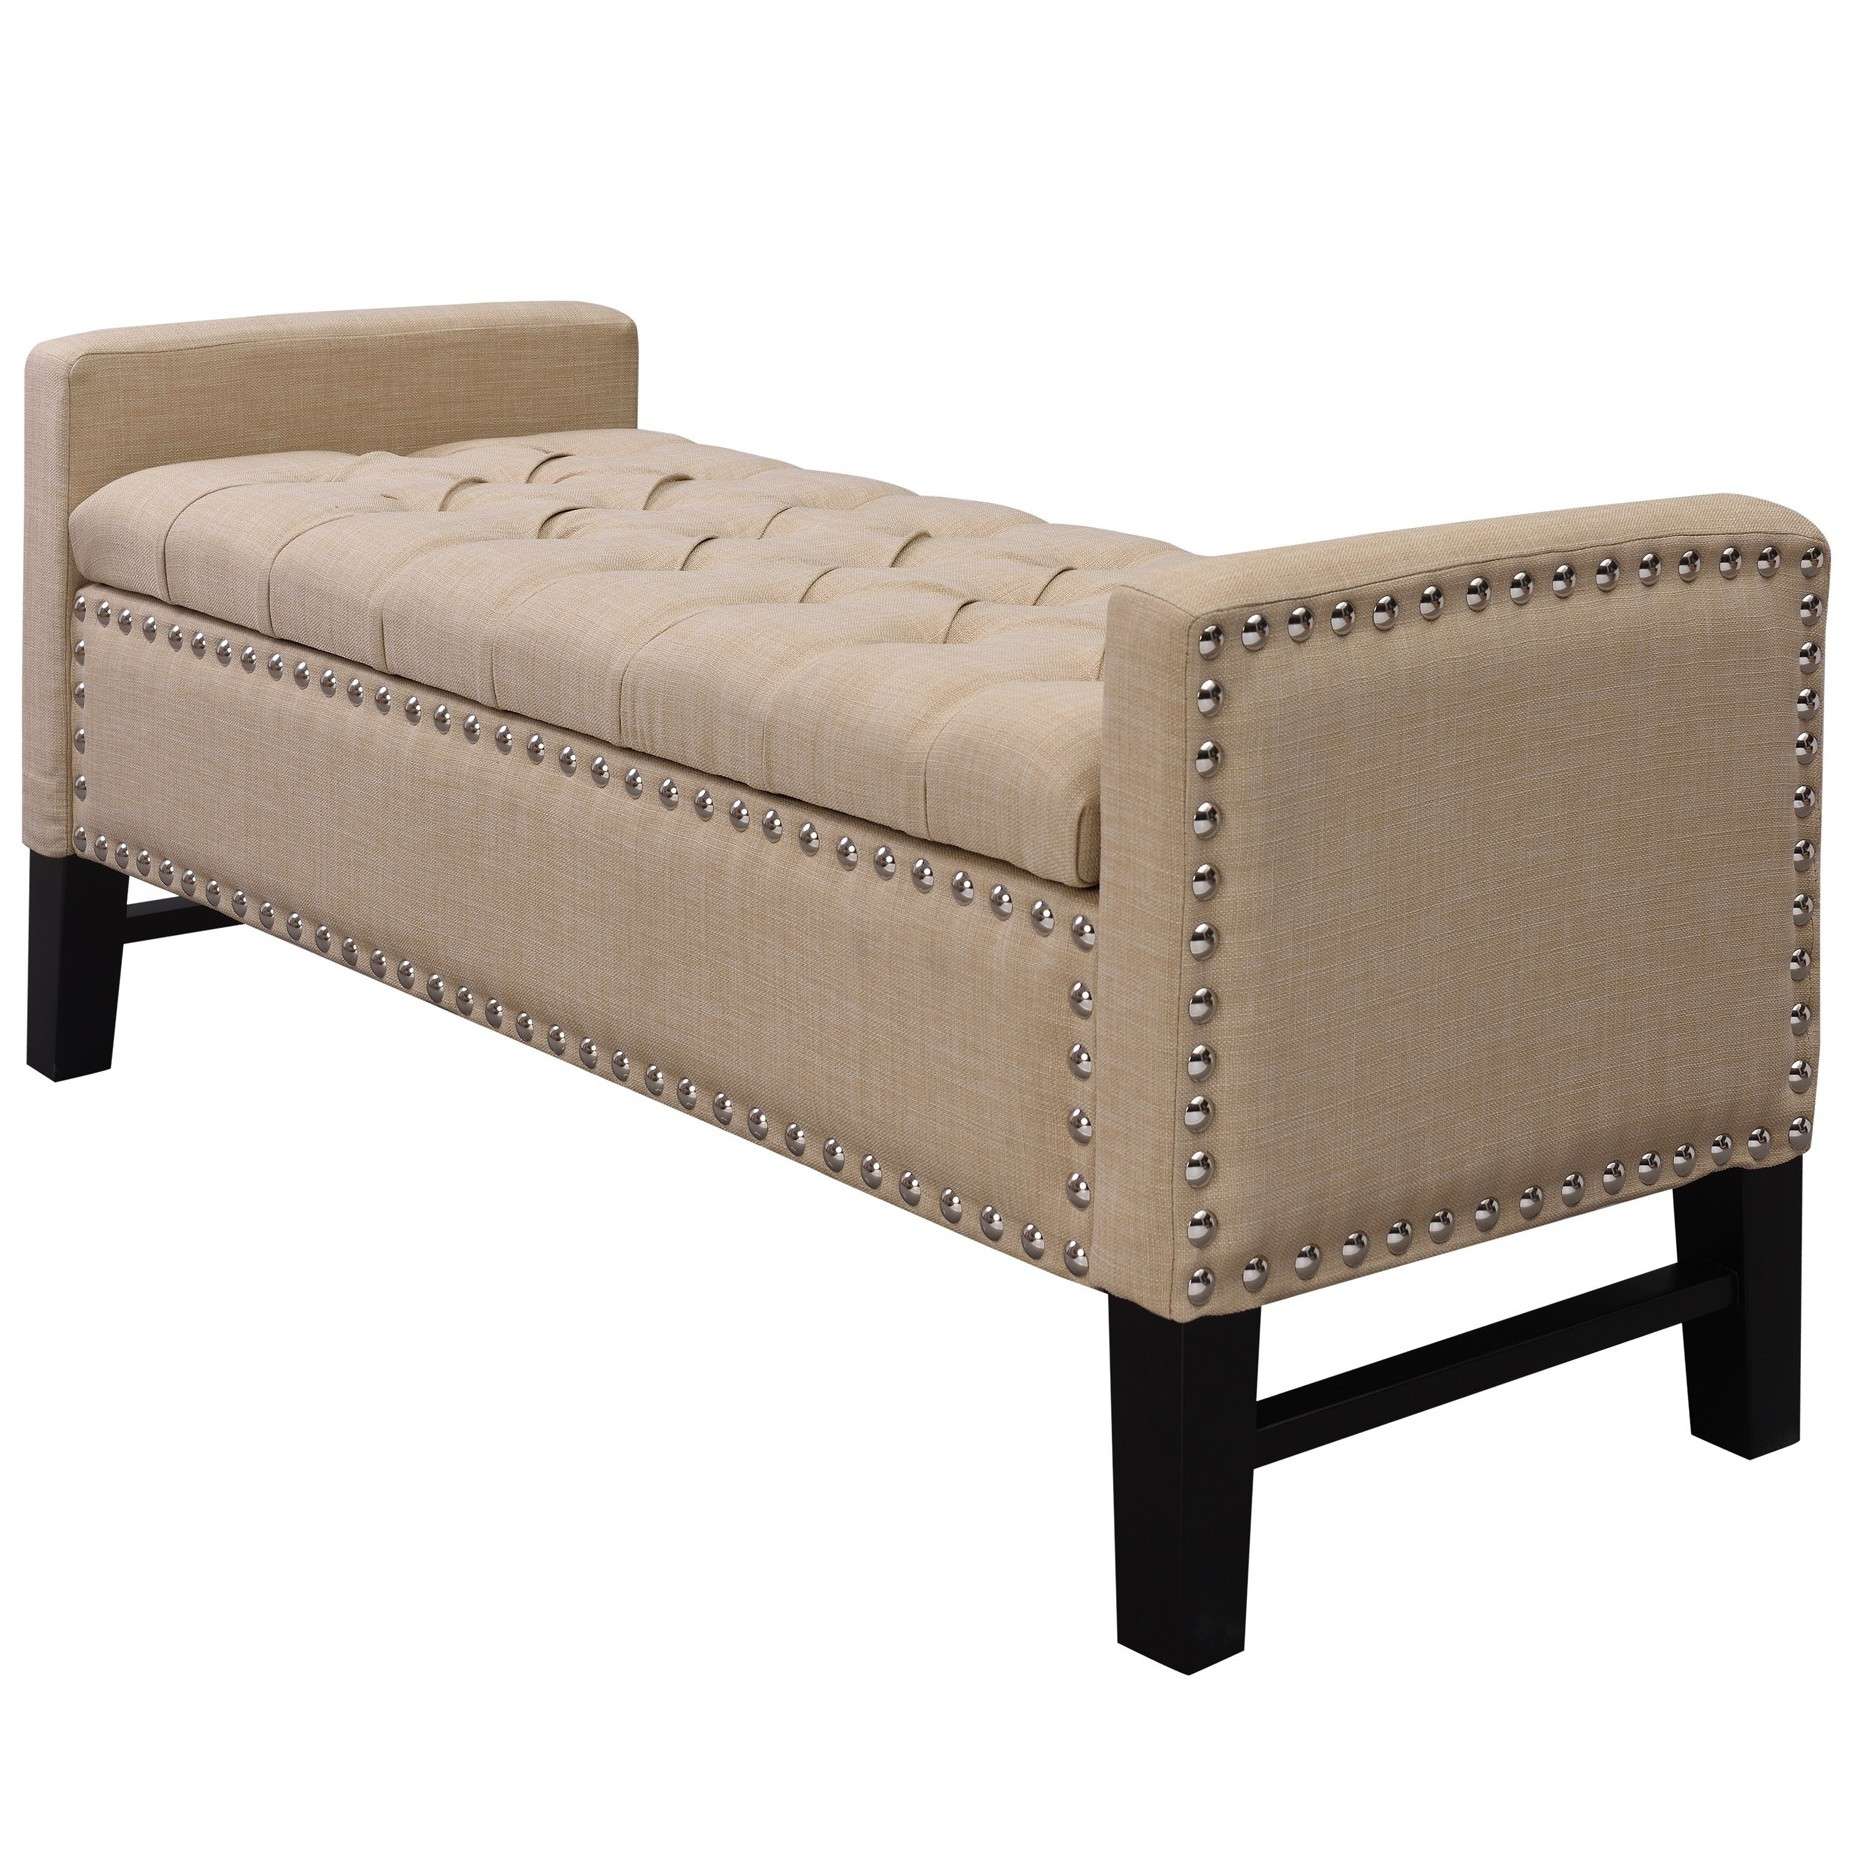 50" Beige and Black Upholstered Linen Bench with Flip top, Shoe Storage-530659-1